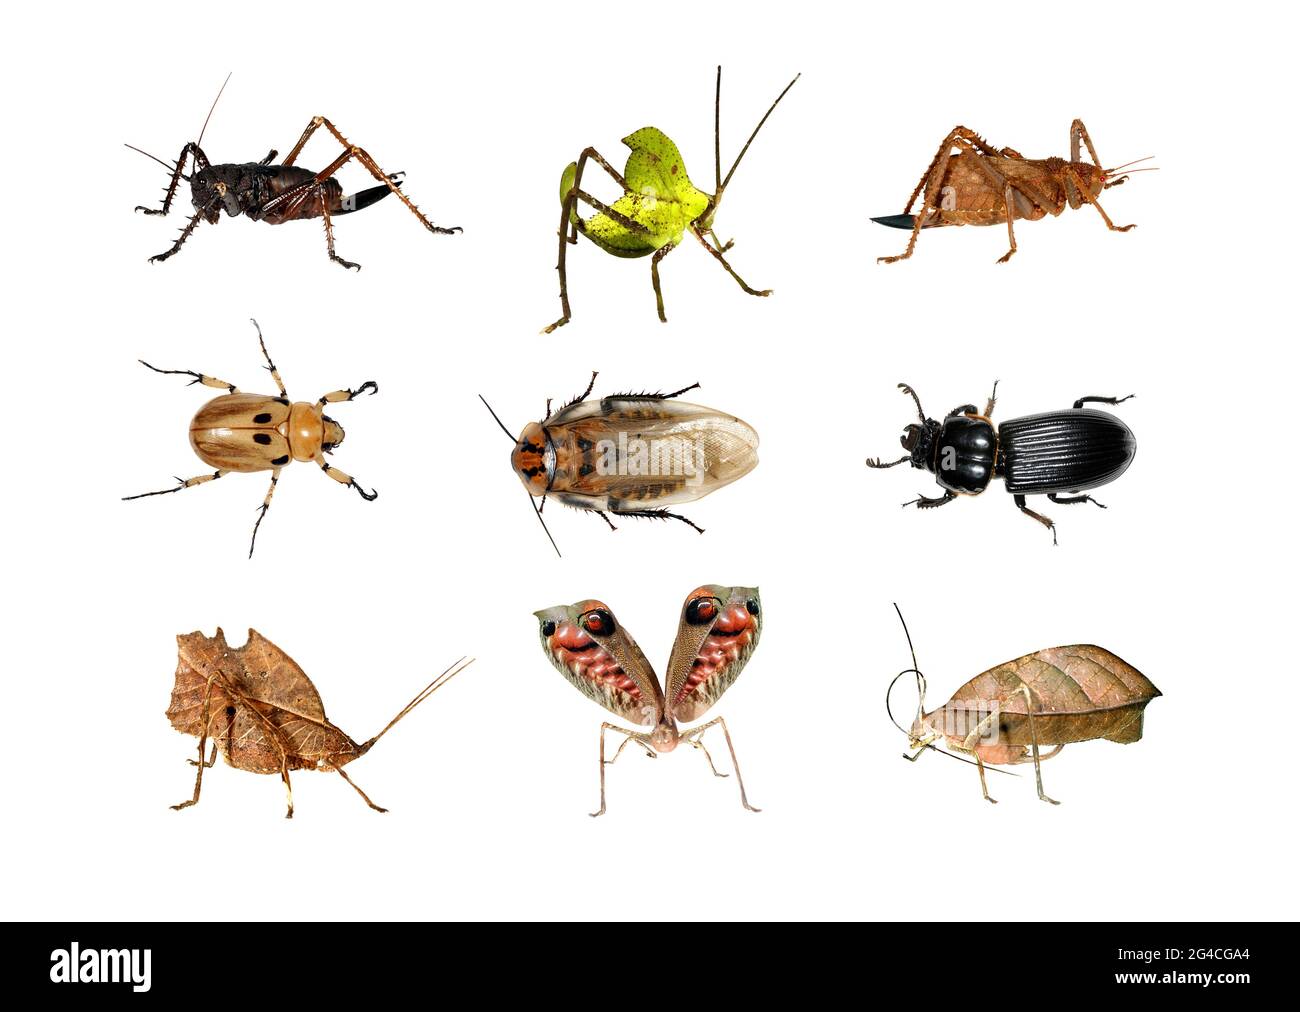 Insects from the Amazon Rainforest Stock Photo